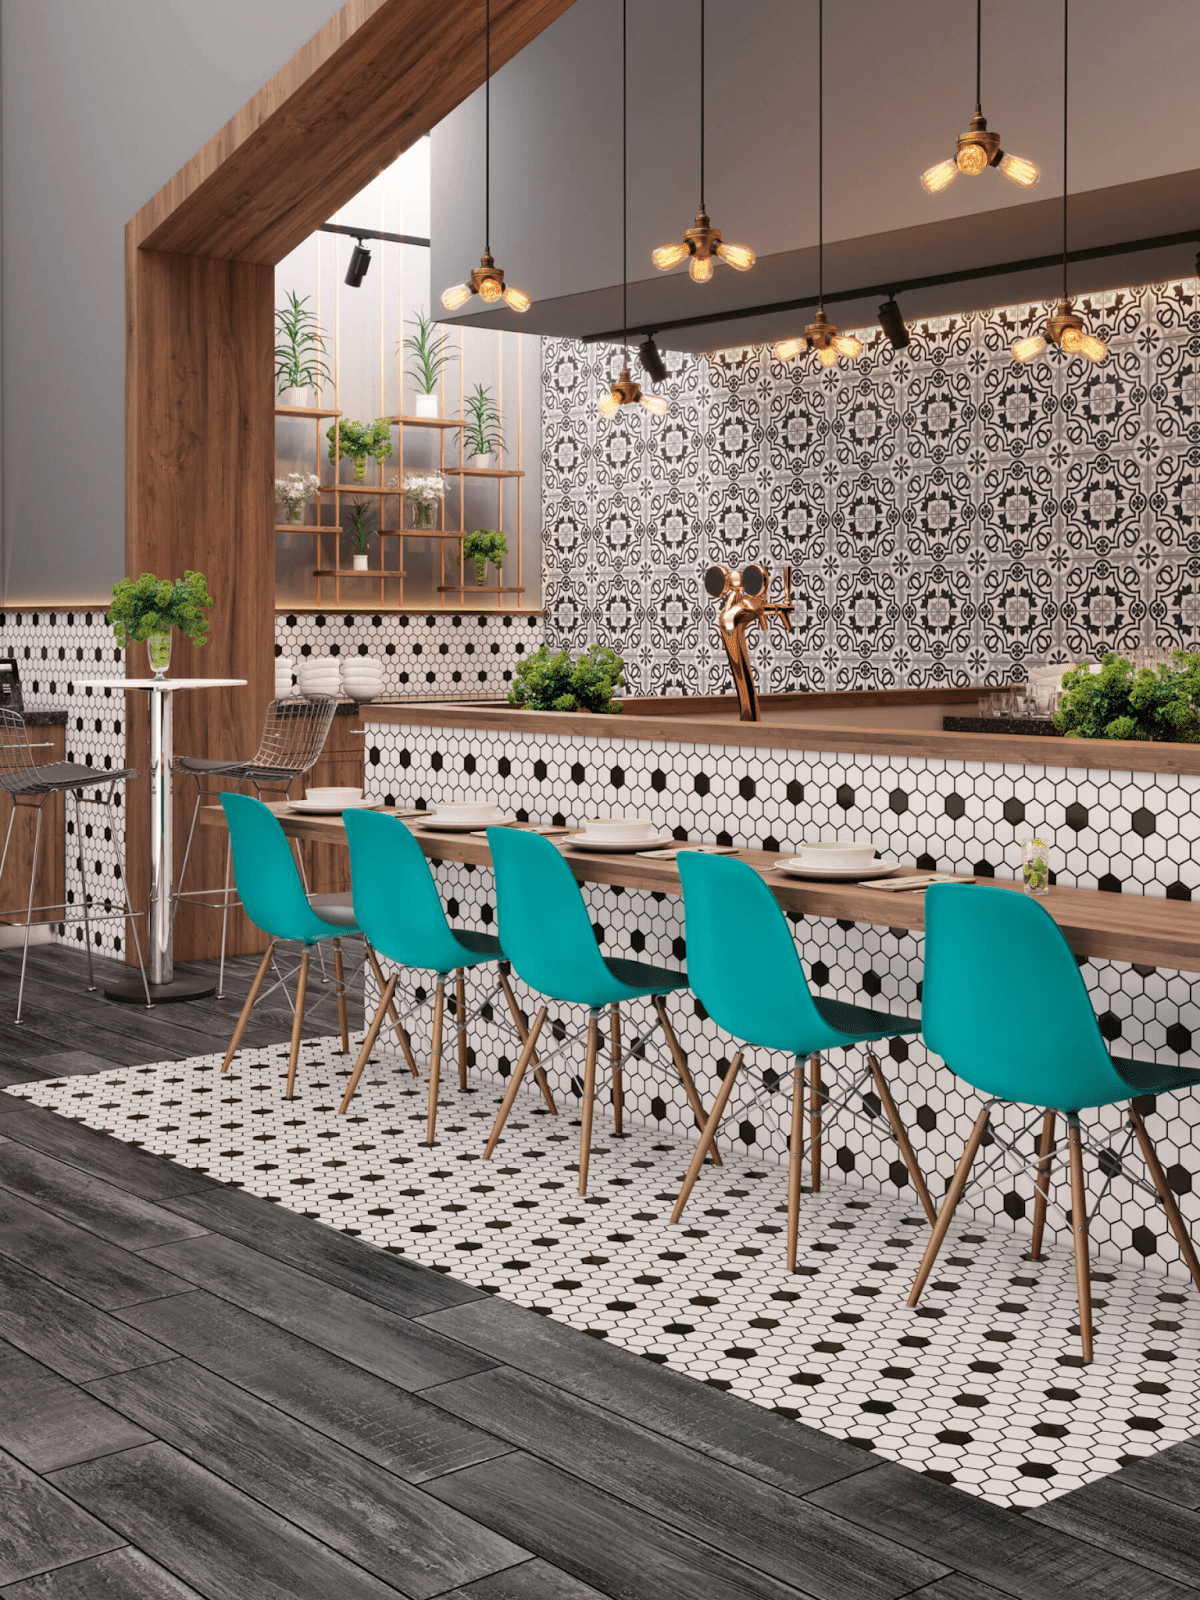 Retro black and white hexagon mosaic tile bar front and flooring